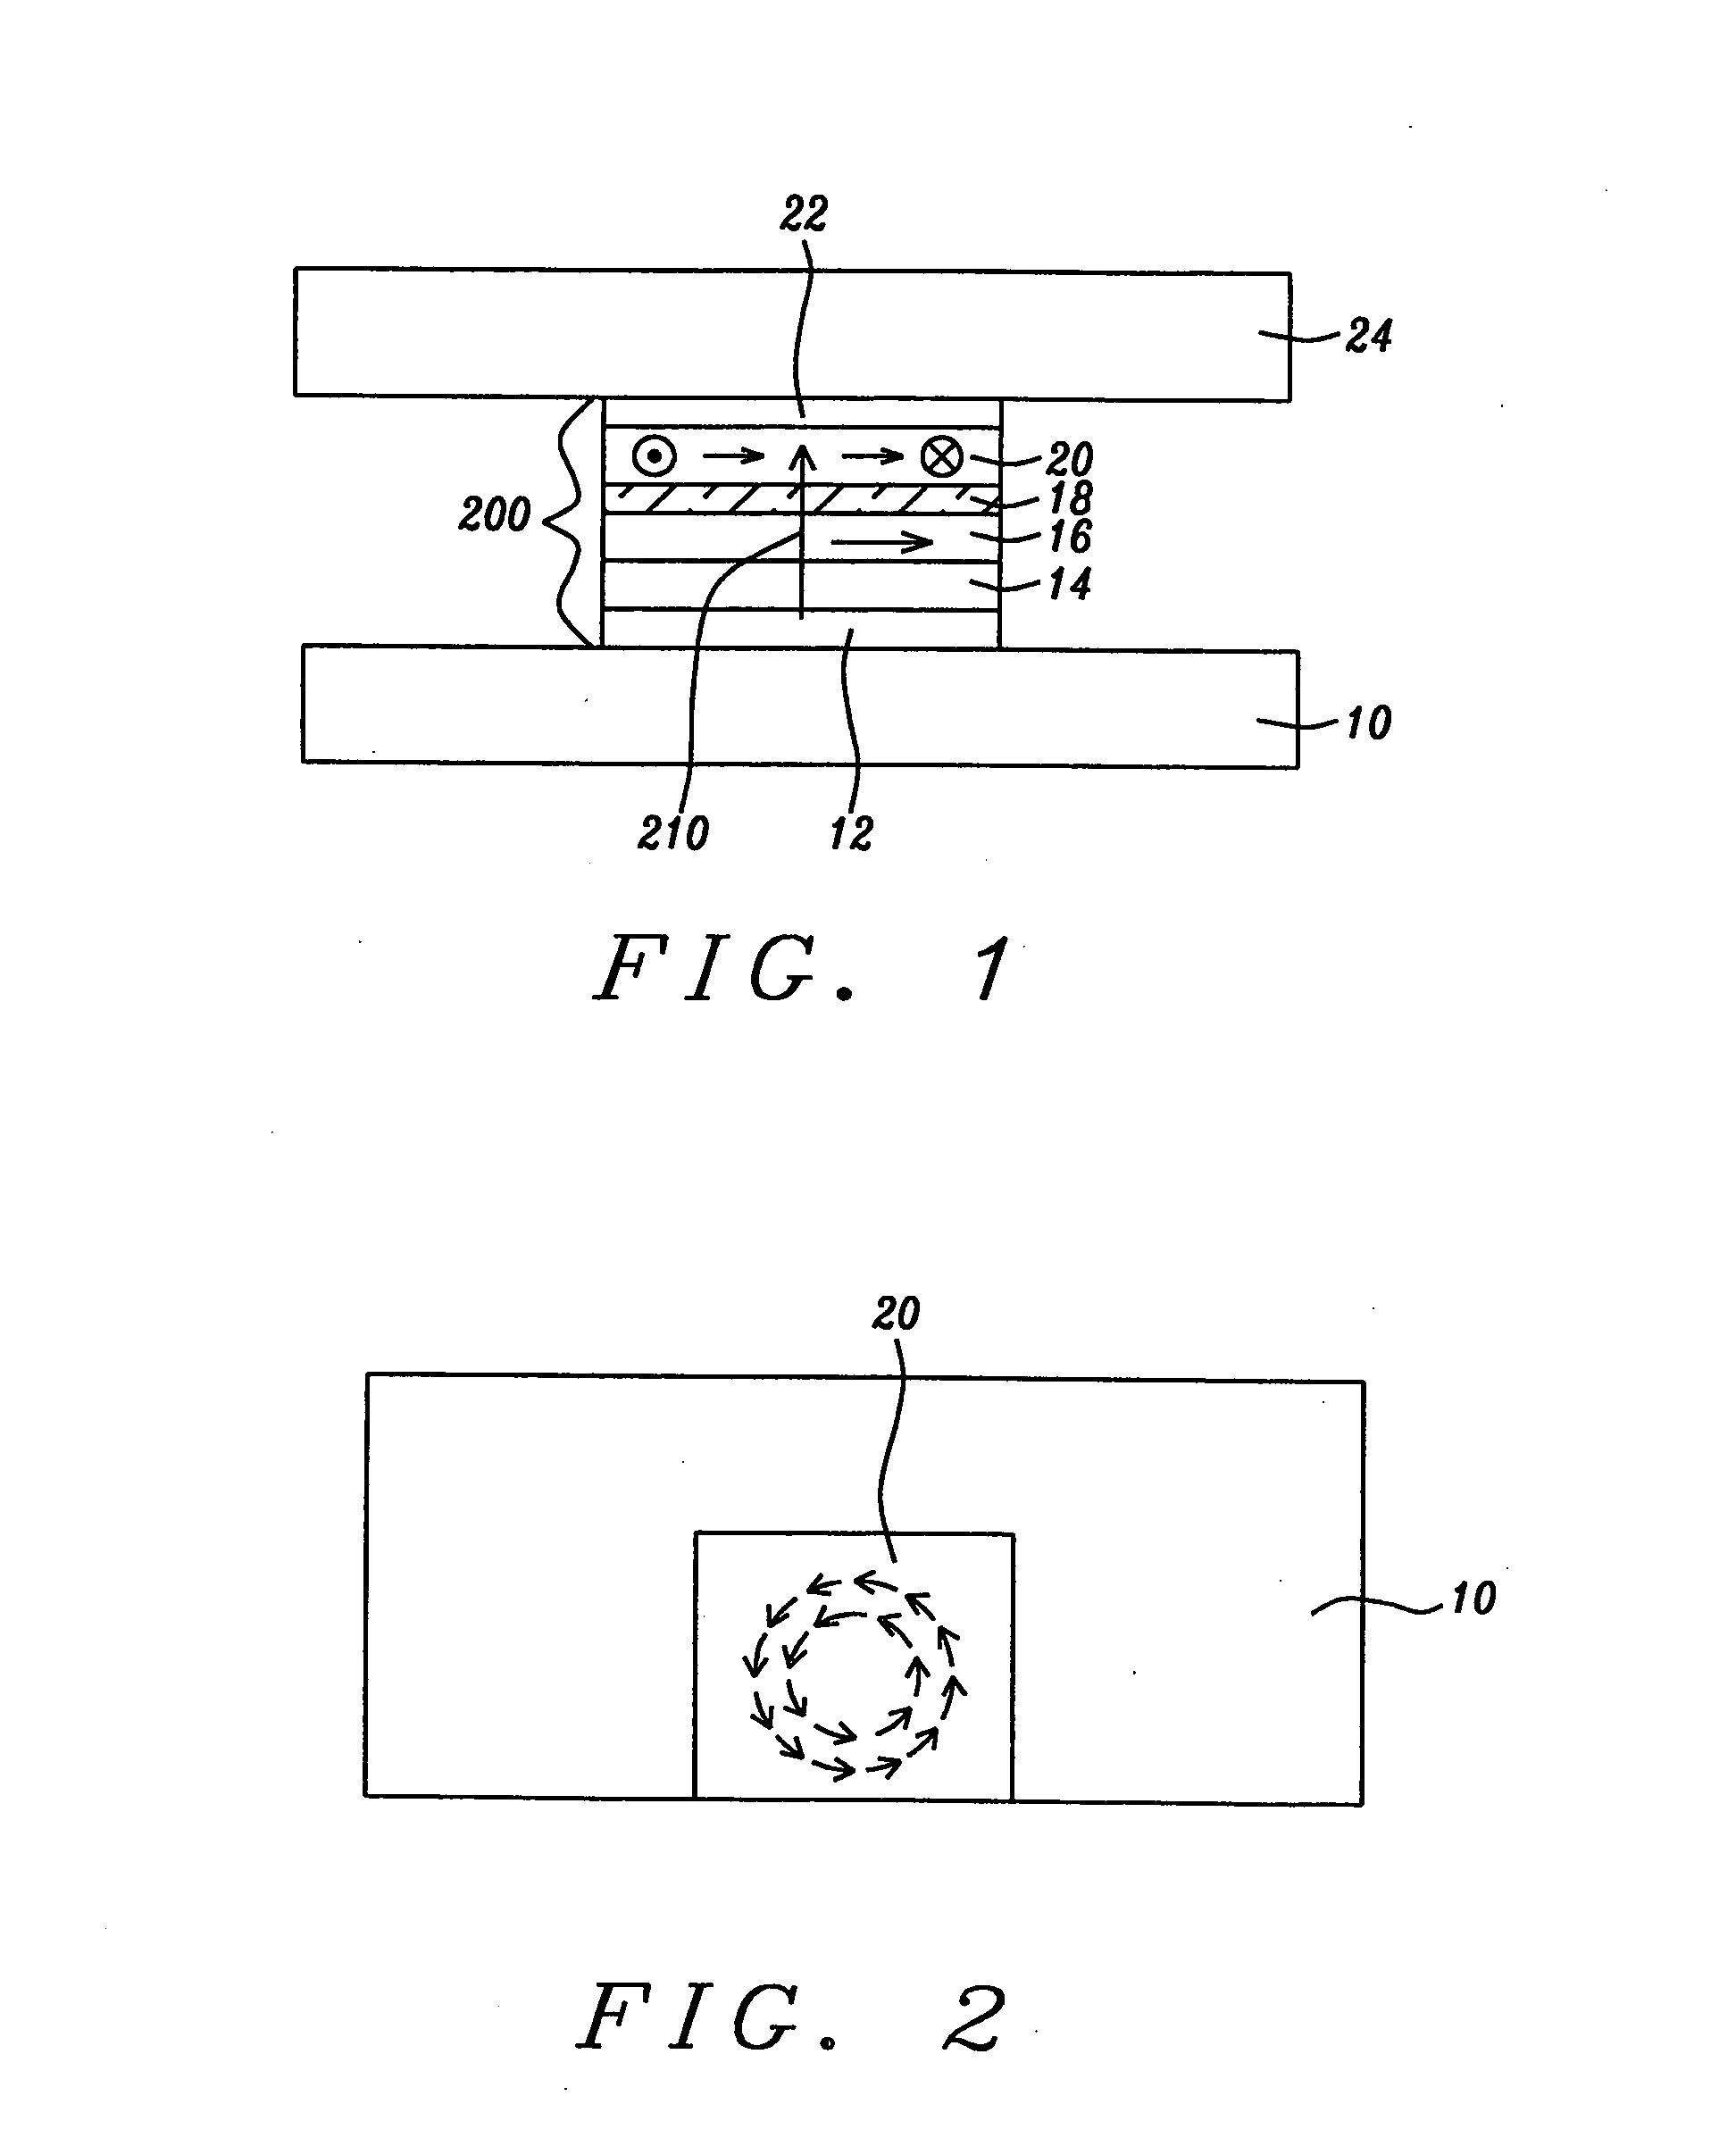 CPP magnetic recording head with self-stabilizing vortex configuration